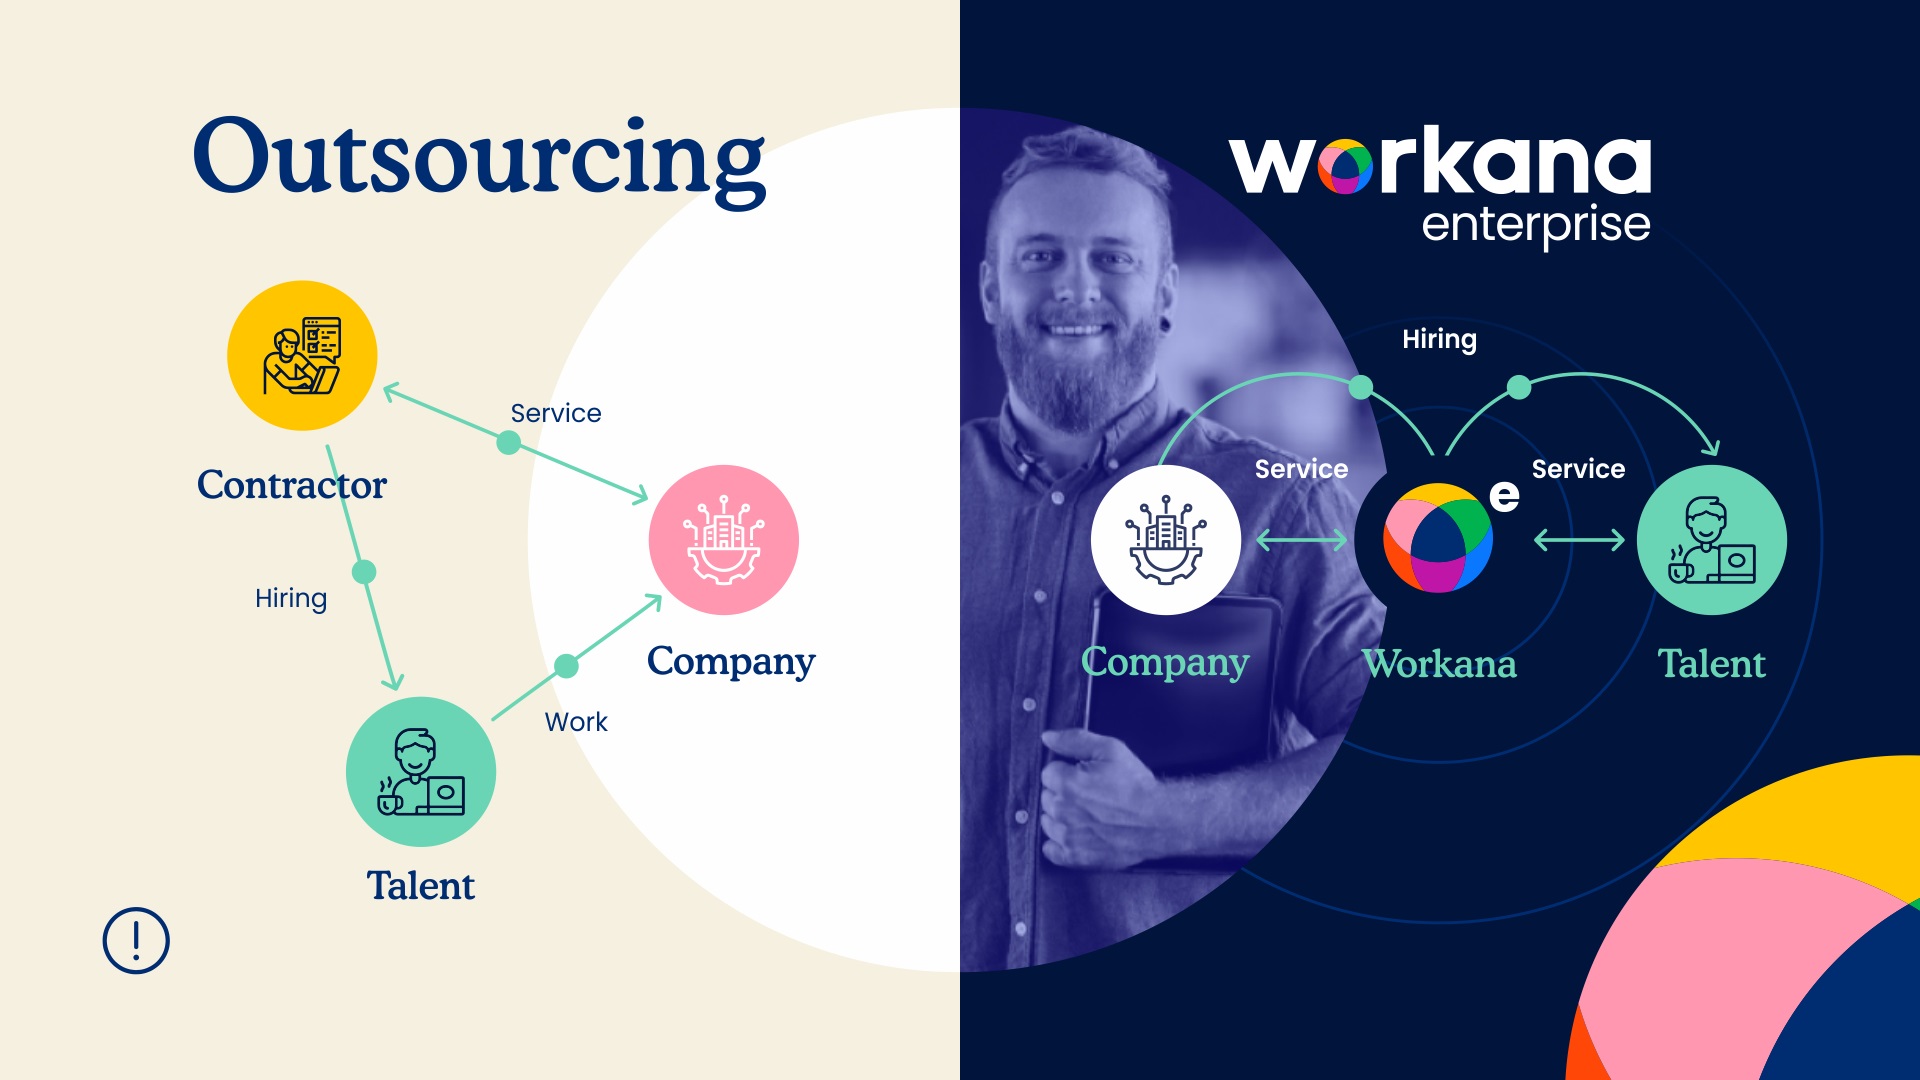 Outsourcing Law in Mexico - infographic outsoursing vs workana enterprise